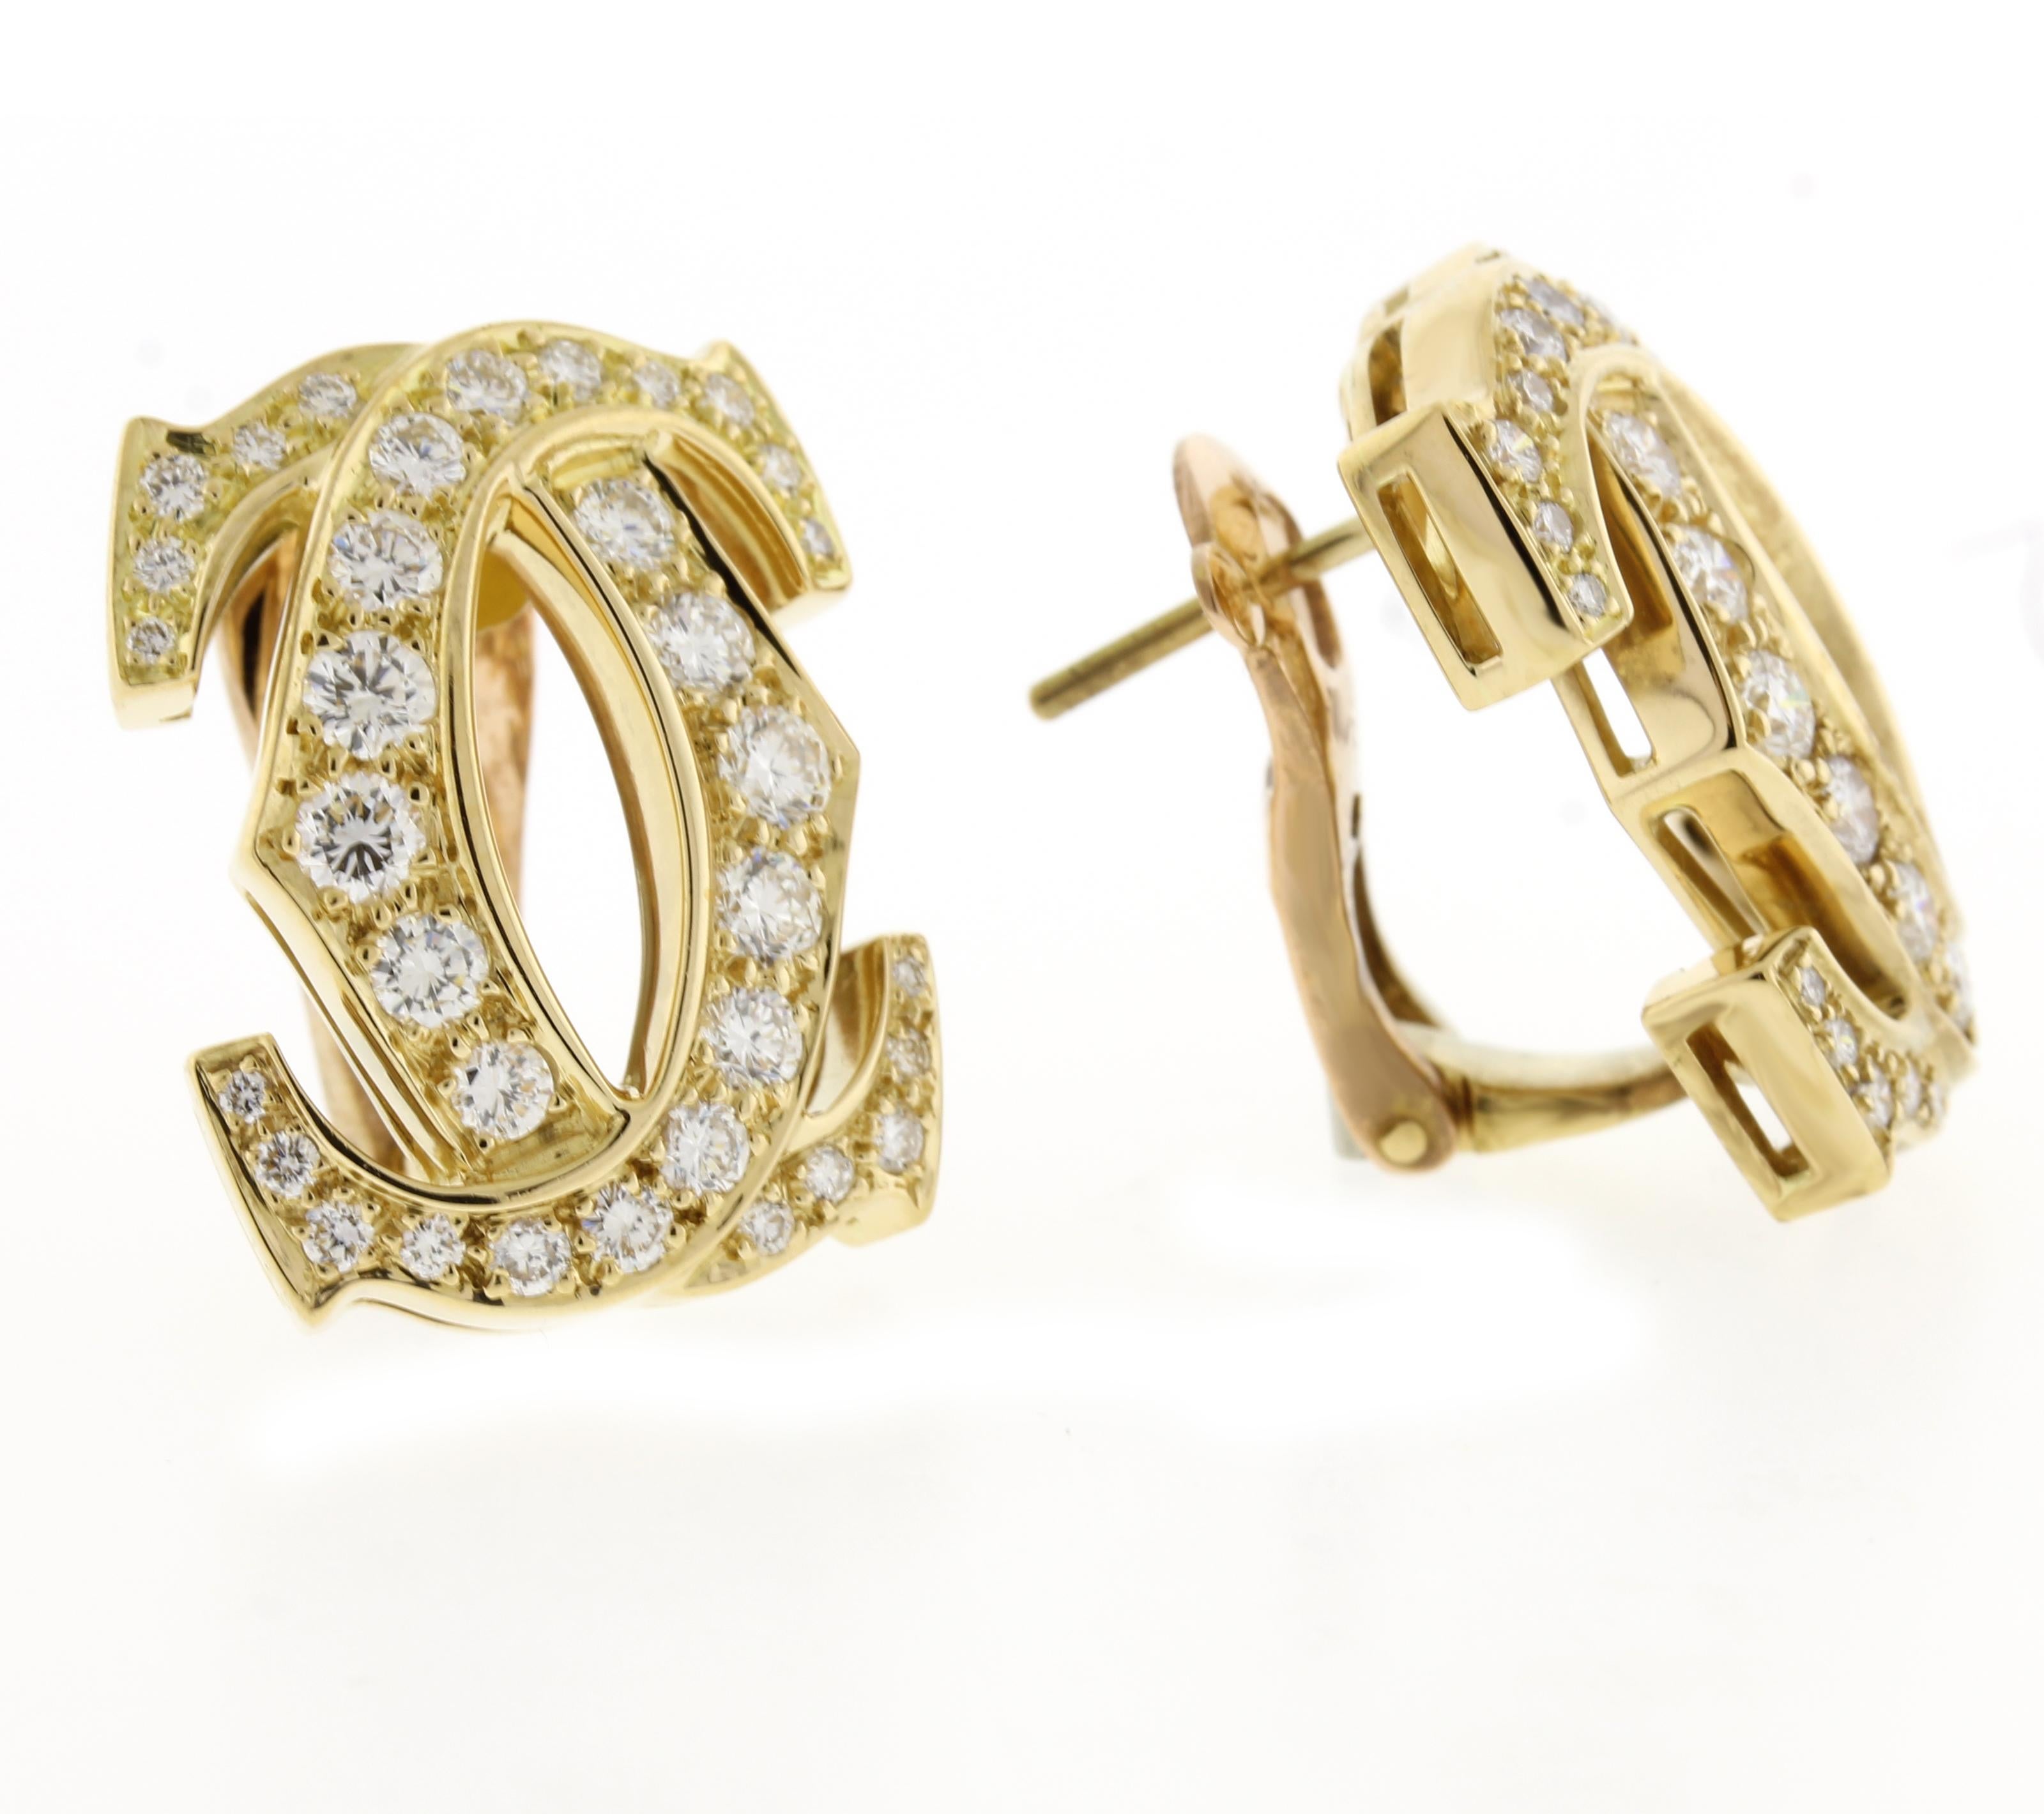 Two mirror image diamond Cartier C motifs intertwine to create these elegant and iconic earrings.
♦ Designer: Cartier
♦ Metal: 18 karat
♦2002
♦ 21X16mm
♦ 68dia=2.25
♦ Original Cartier box and sales receipt 
♦ Condition: Excellent , pre-owned
♦